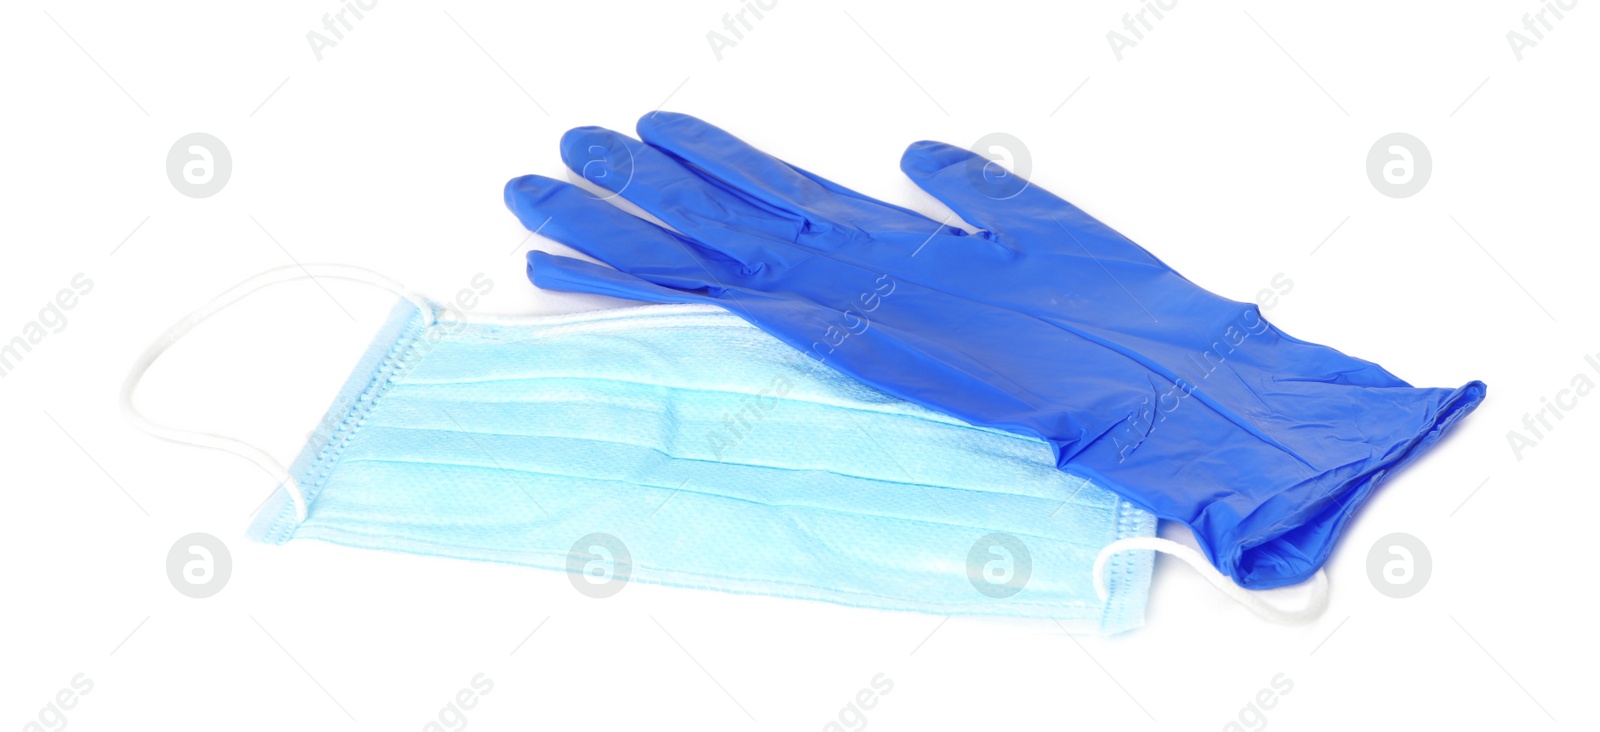 Photo of Medical glove and protective face mask on white background